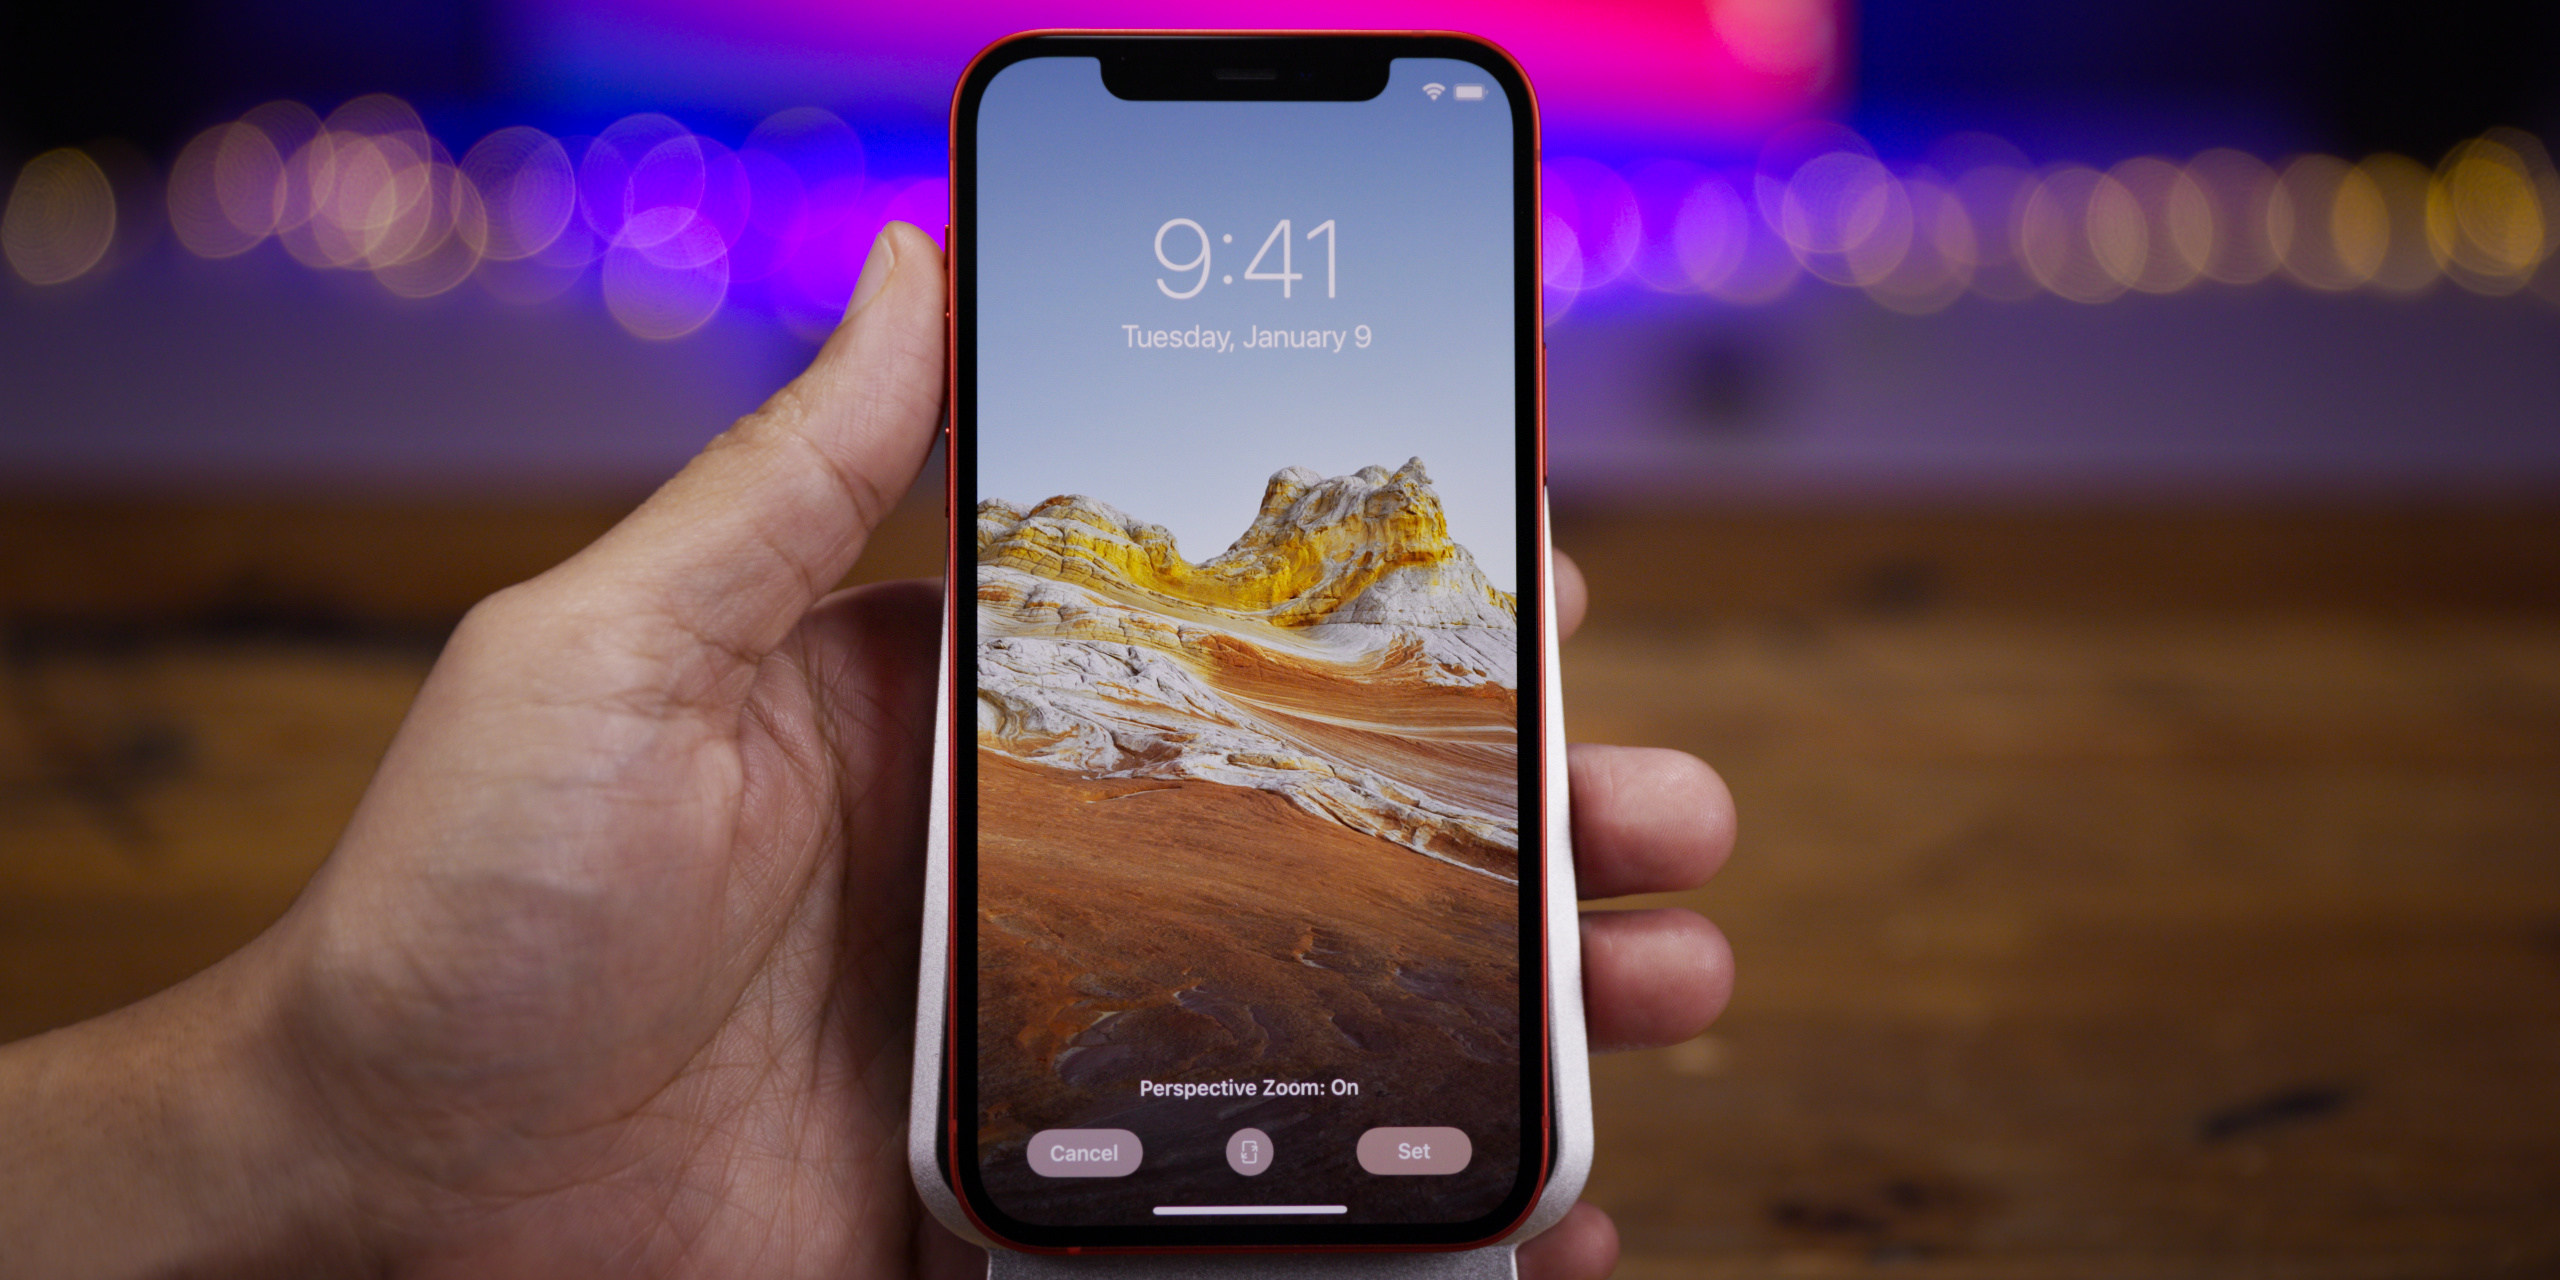 iOS 15: Features, release date, and more - 9to5Mac